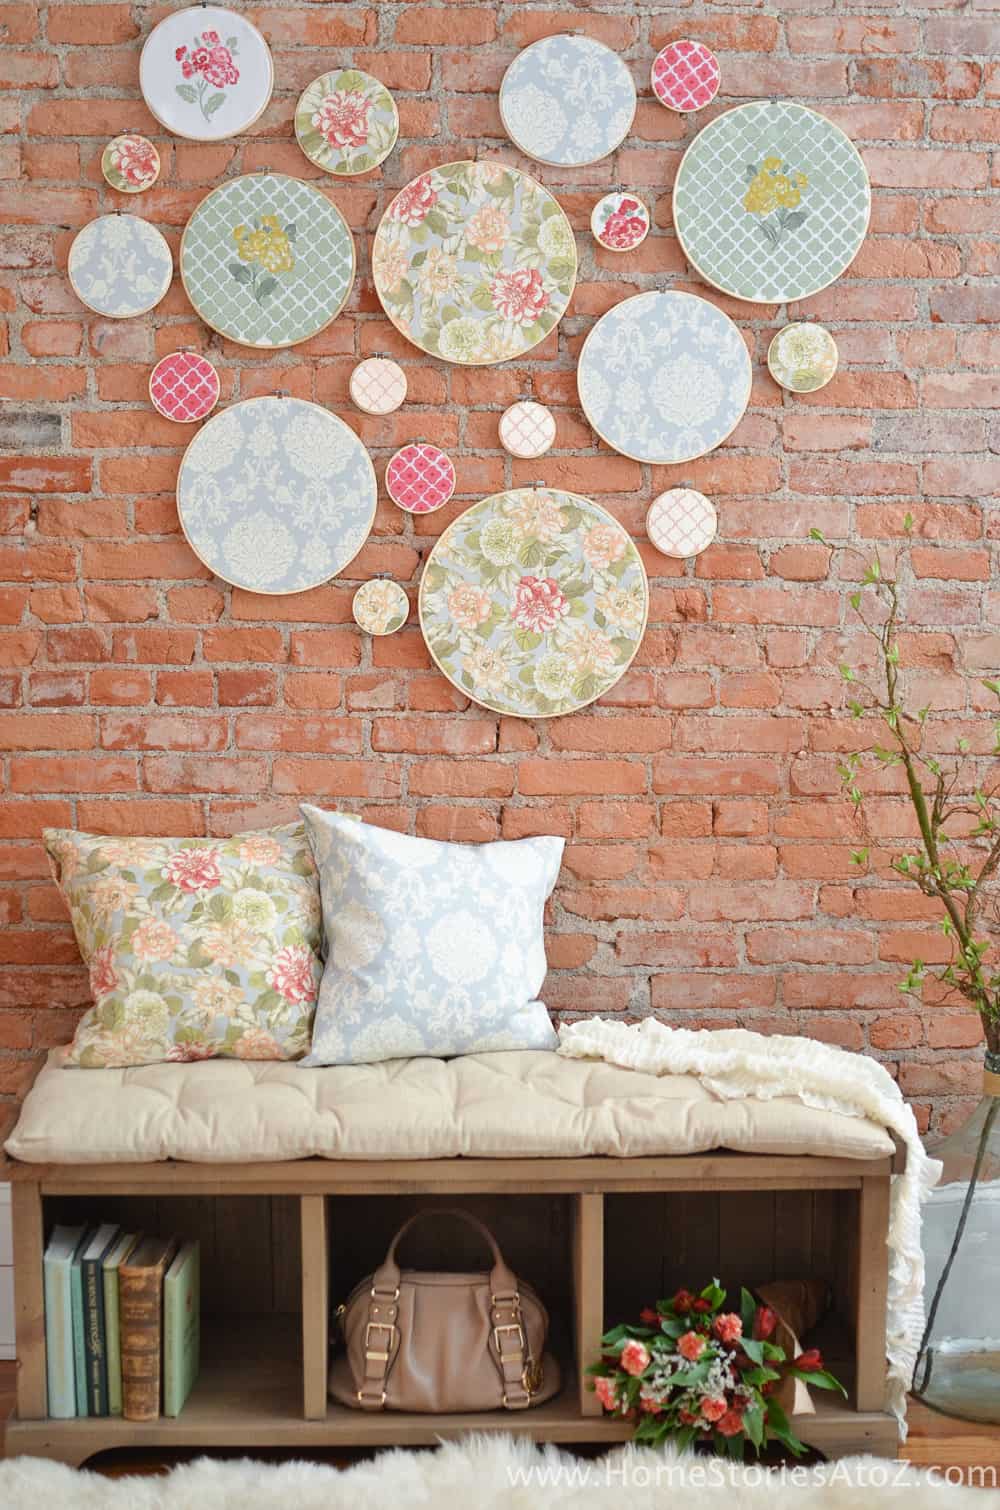 Embroidery hoop stretched fabric wall art